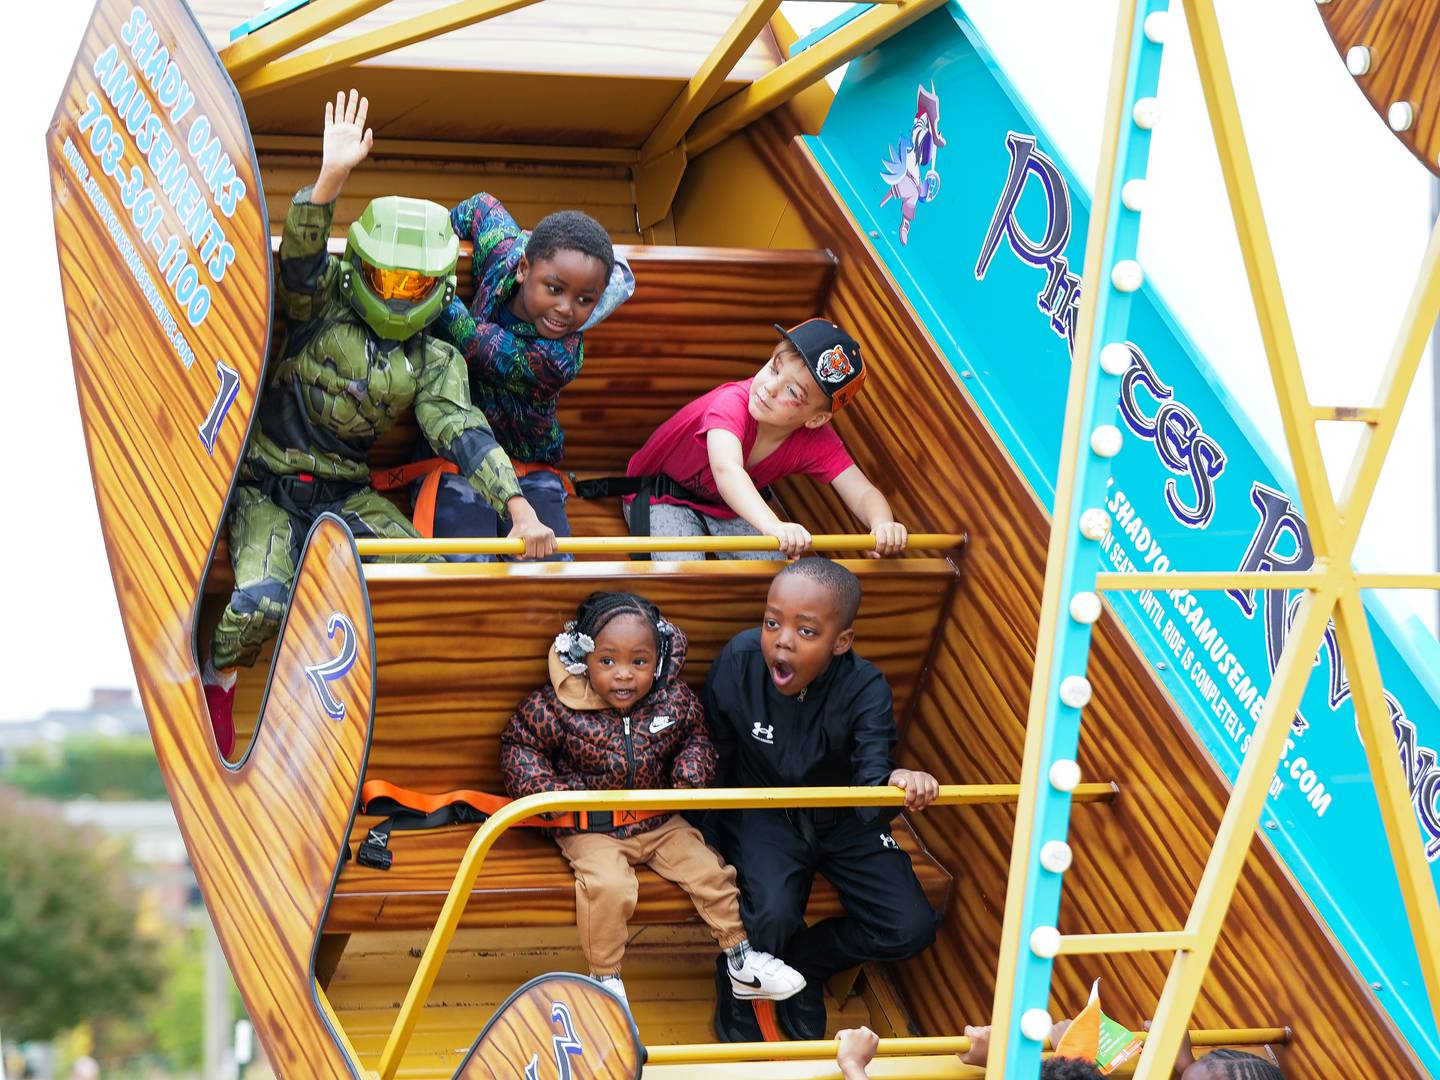 Children enjoy one of the many rides and attractions at the Harbor Harvest Festival. The event was located in the Inner Harbor, right next to the newly constructed Rash Field Park.